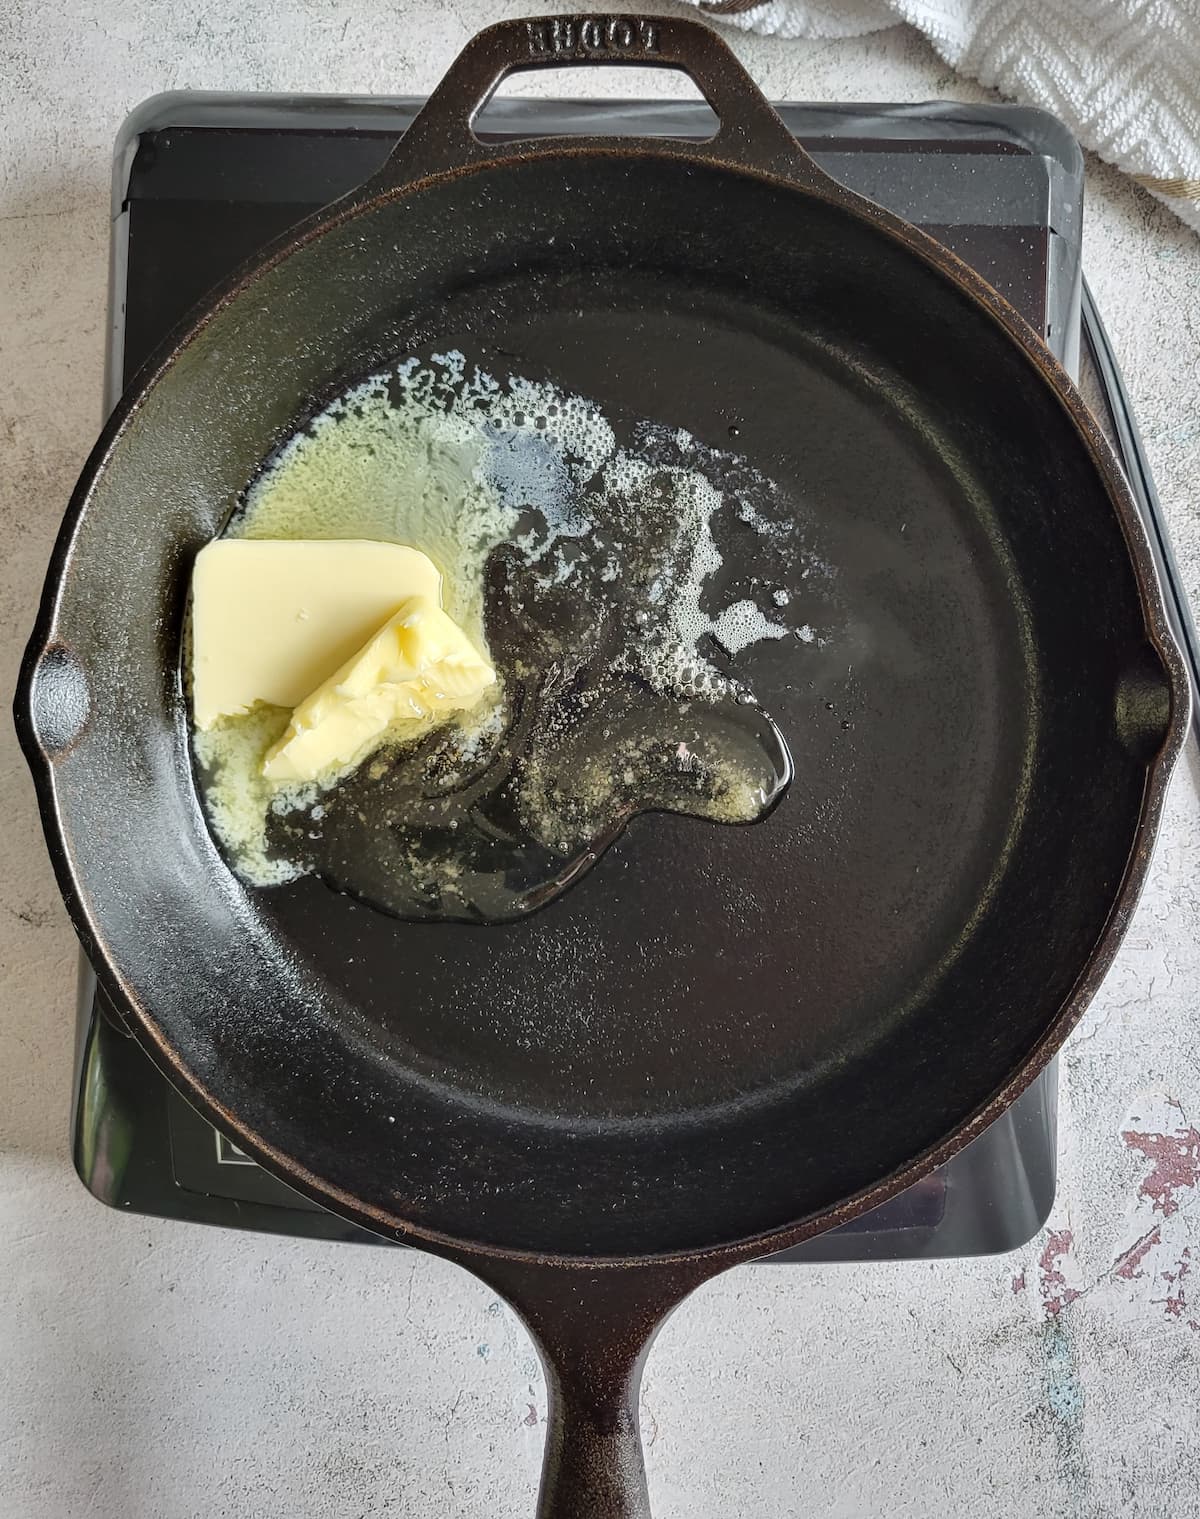 honey and butter melting in a cast iron skillet on a burner